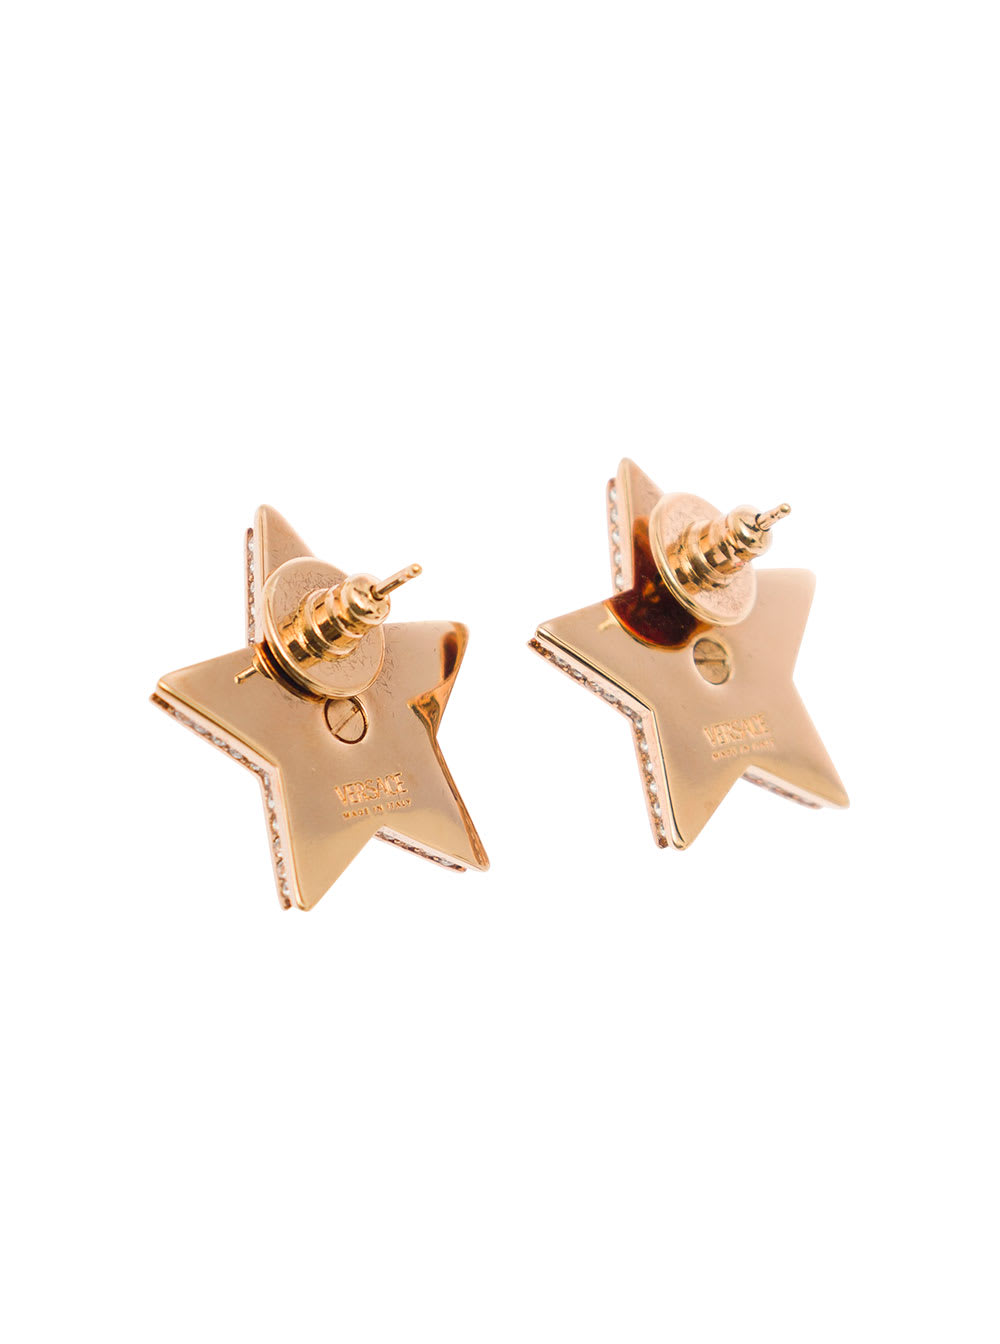 VERSACE GOLD-COLORED STAR EARRINGS WITH MEDUSA IN METAL WOMAN